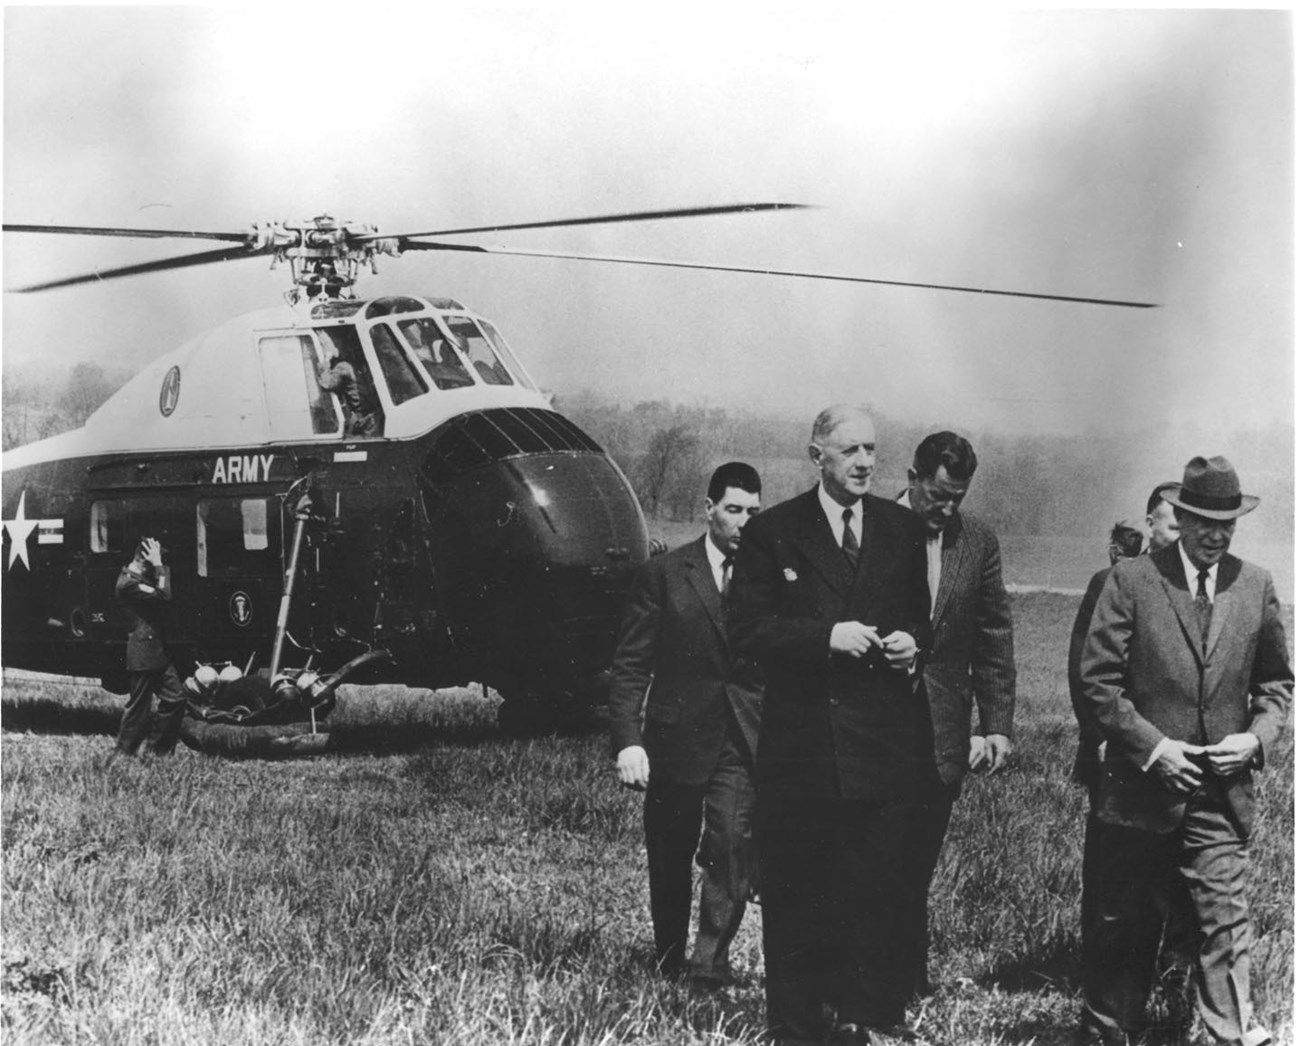 Dwight Eisenhower, wearing a grey suit and hat, walks alongside French President Charles DeGaulle, who has just arrived by helicopter to the Eisenhower Farm. Several other men in suits are in photograph.